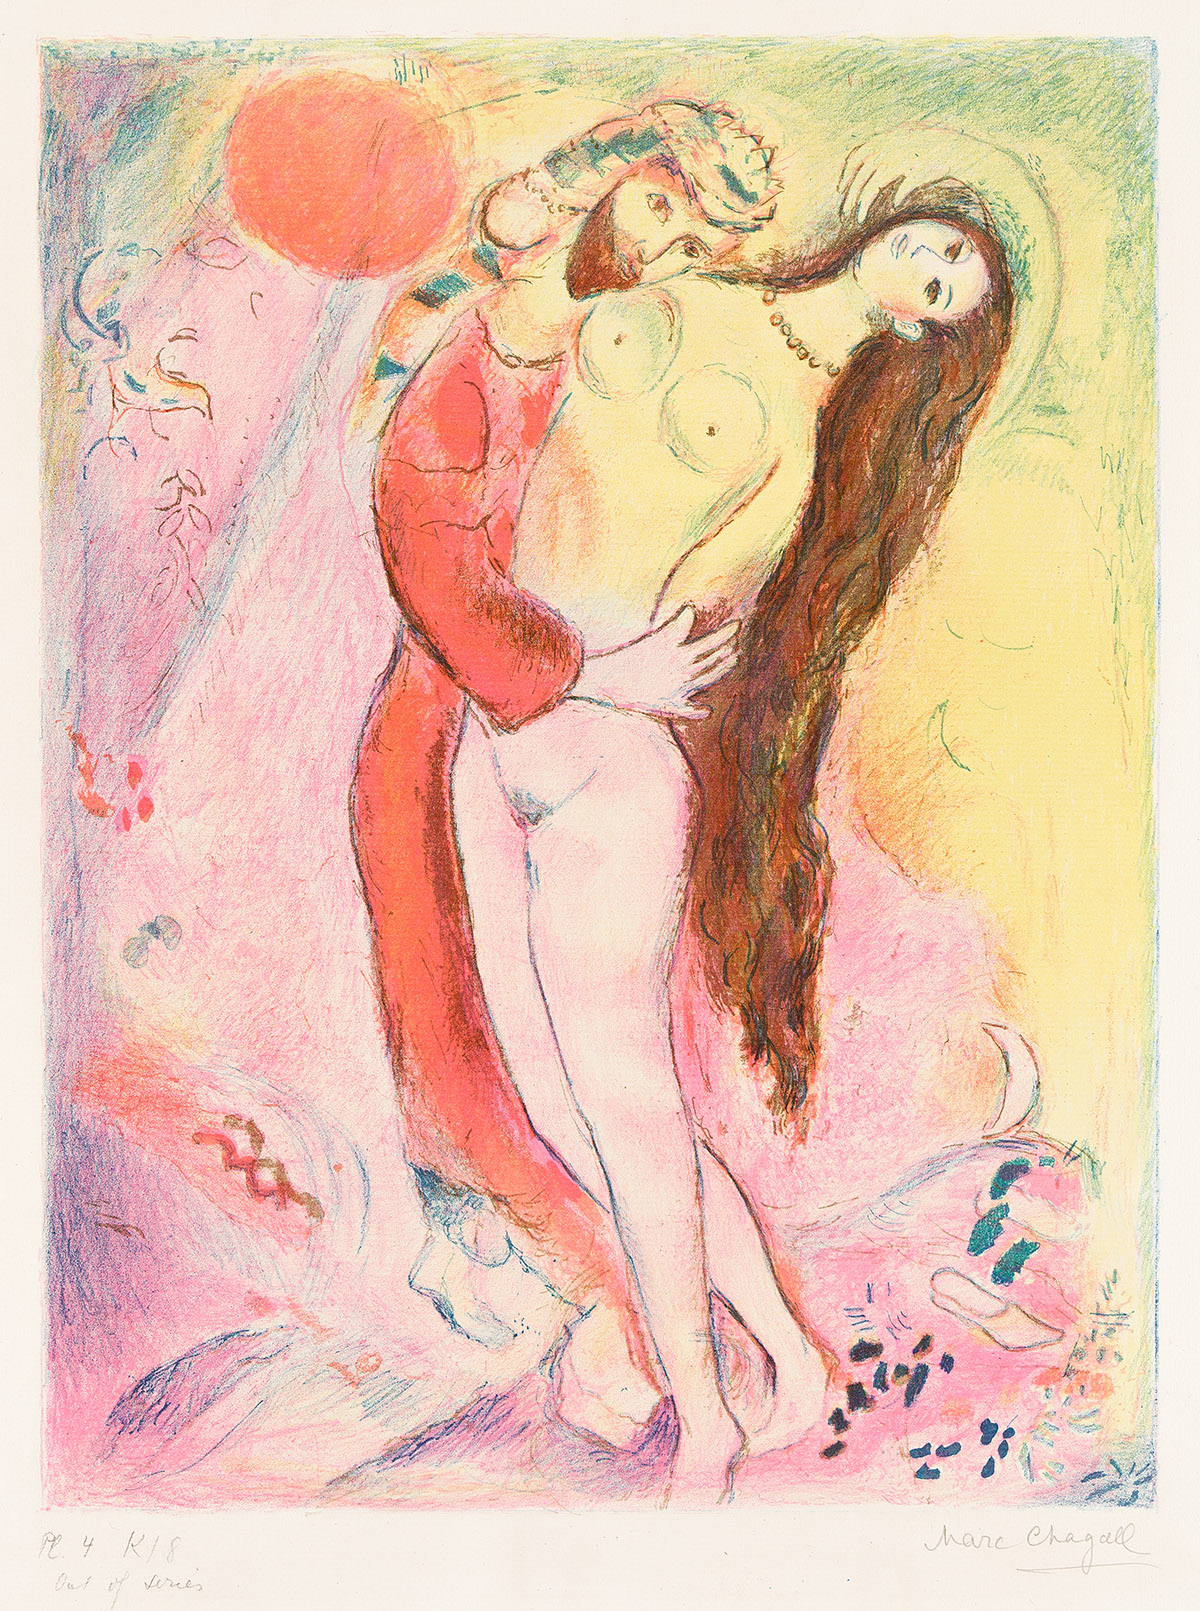 MARC CHAGALL Disrobing her with his own hand, the King looked upon her body...